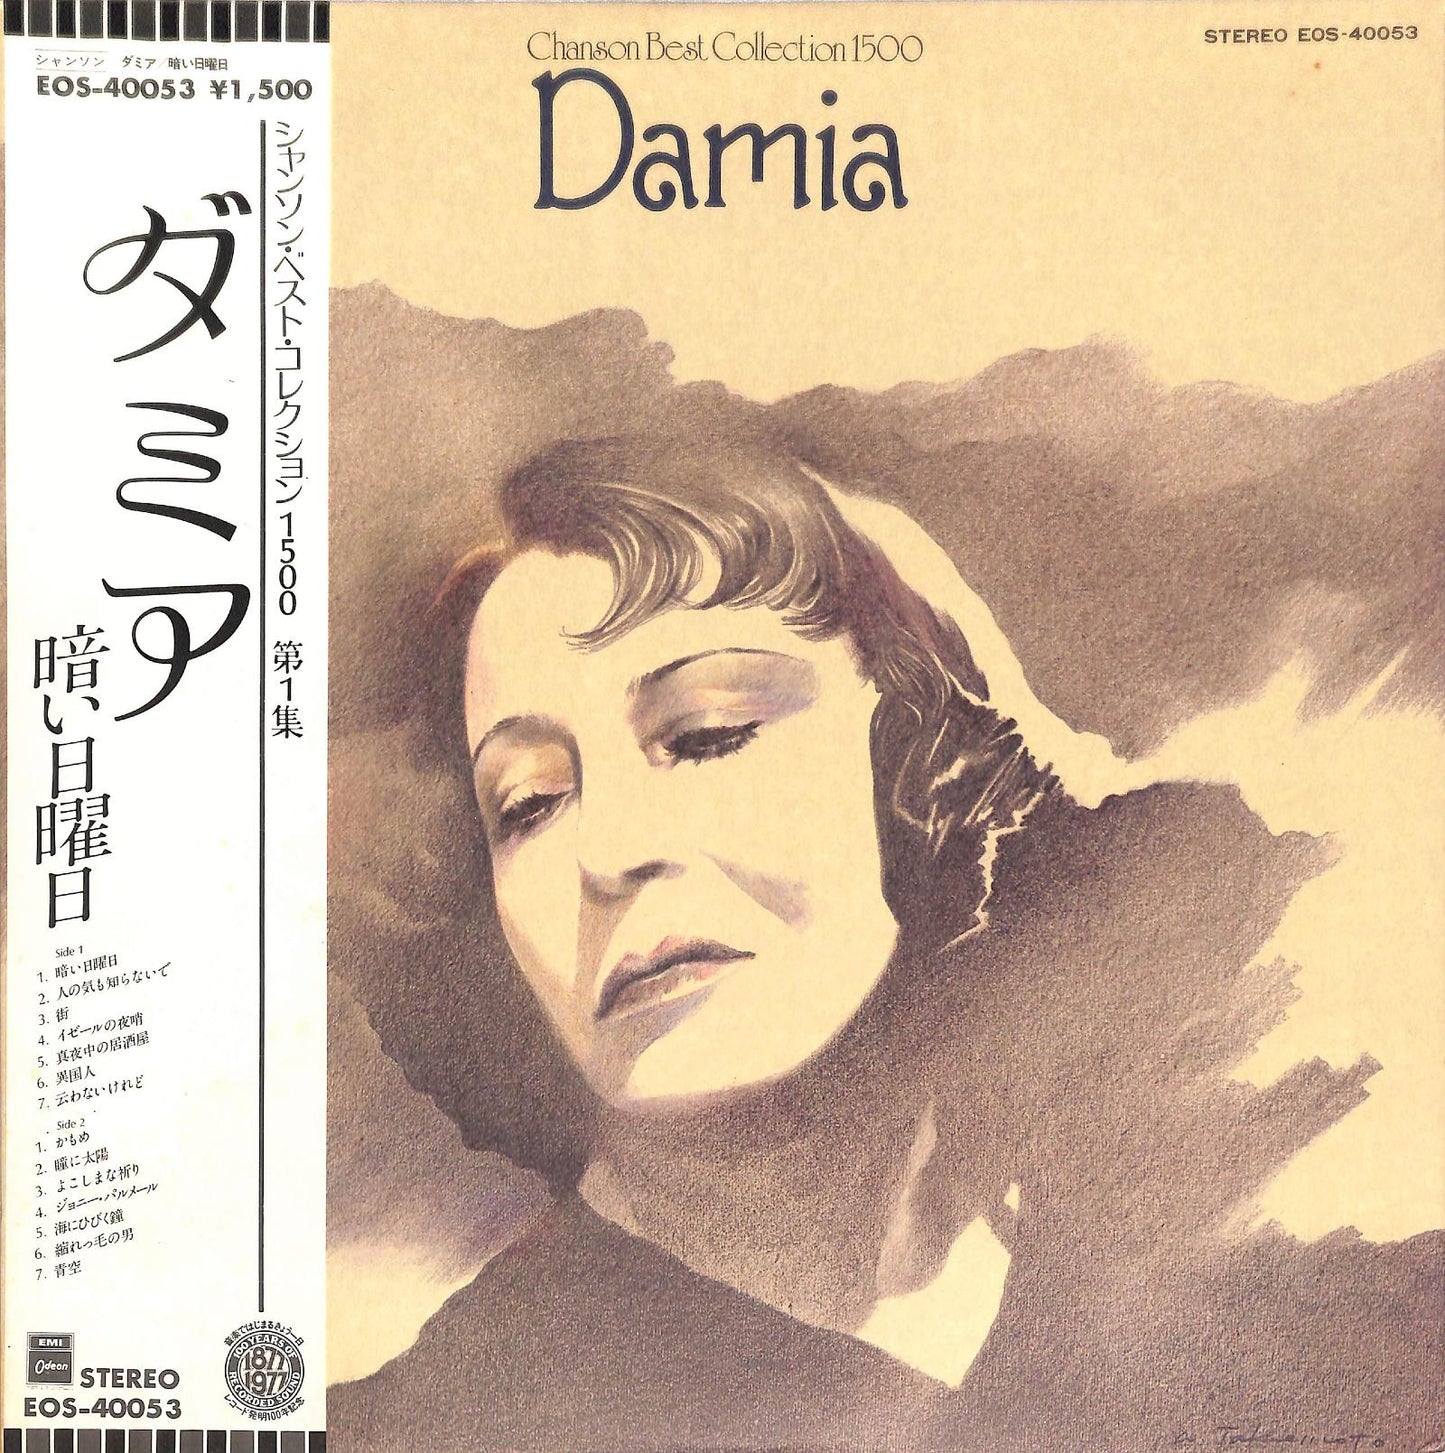 DAMIA - Chanson Best Collection 1500